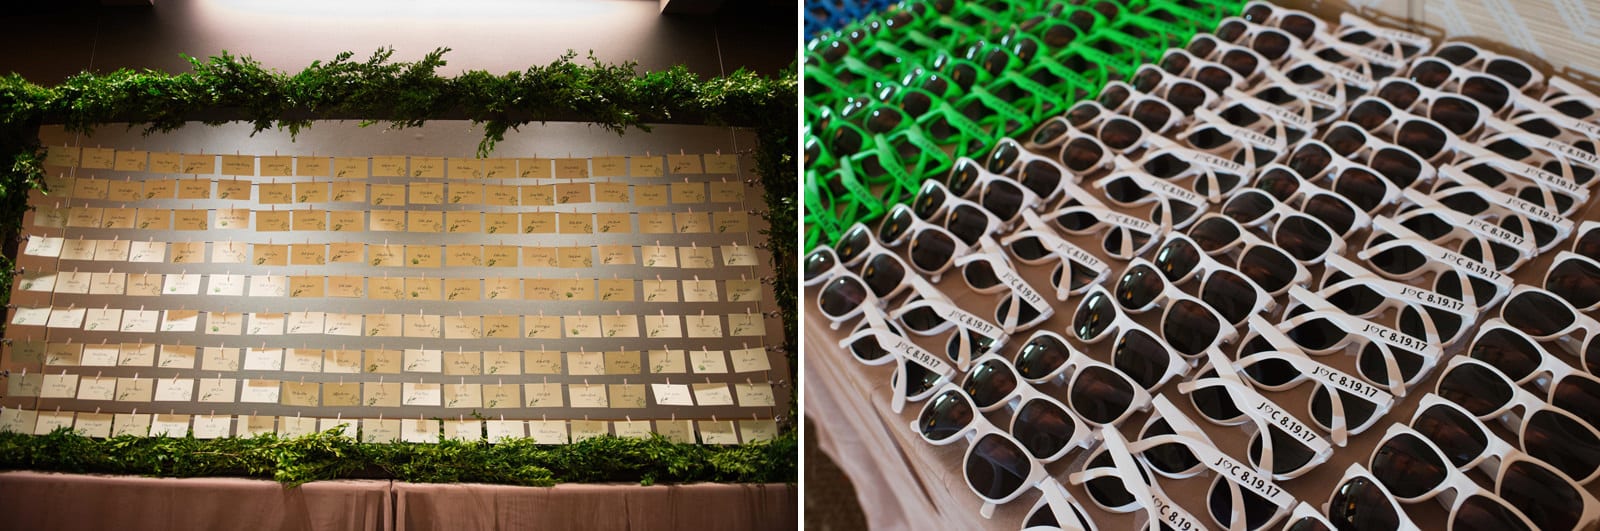 An escort table with cards hung on strings inside of a greenery-covered frame. Hundreds of sunglasses with a bride and groom's monogram on it Wedding Photography at Fairmont Hotel Pittsburgh.